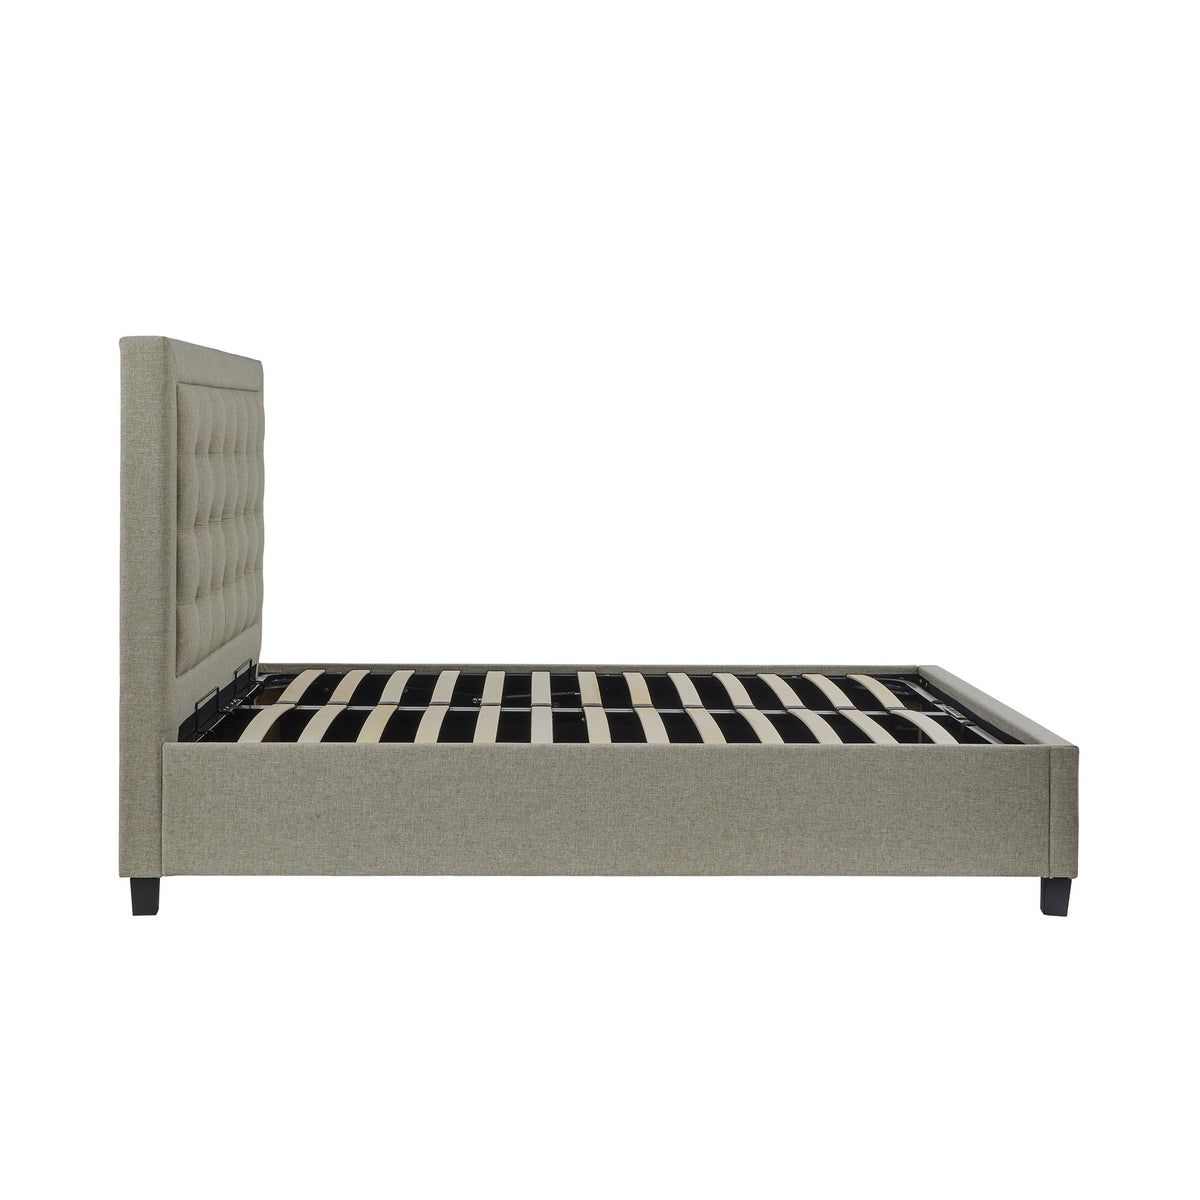 Ashley Oatmeal Upholstered Ottoman Storage Bed 